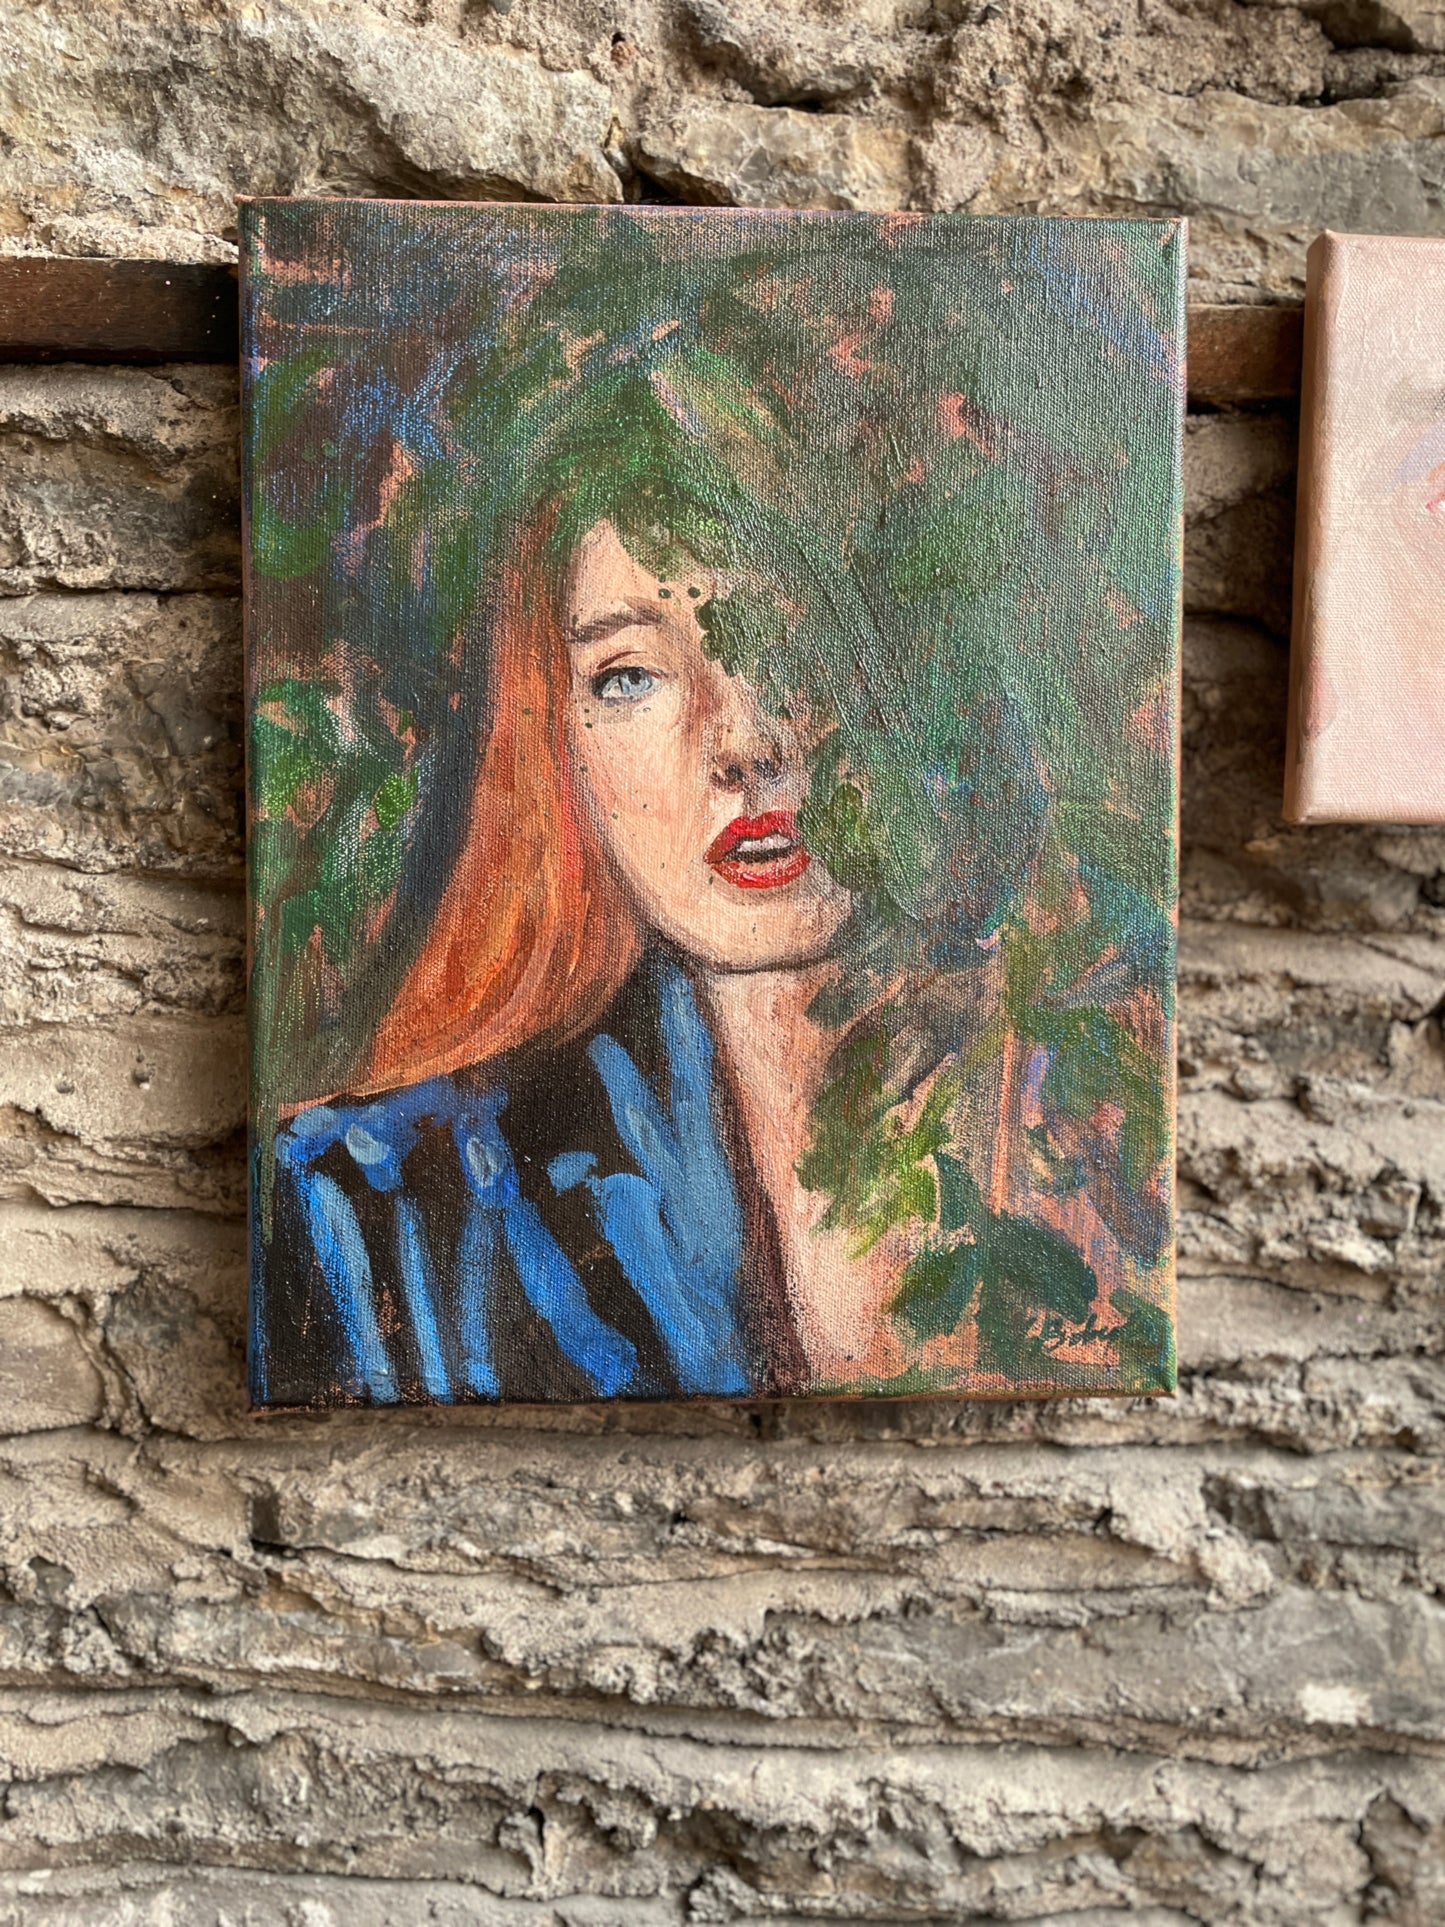 In the rain. Portrait. Acrylics on stretched canvas. Unique gift.